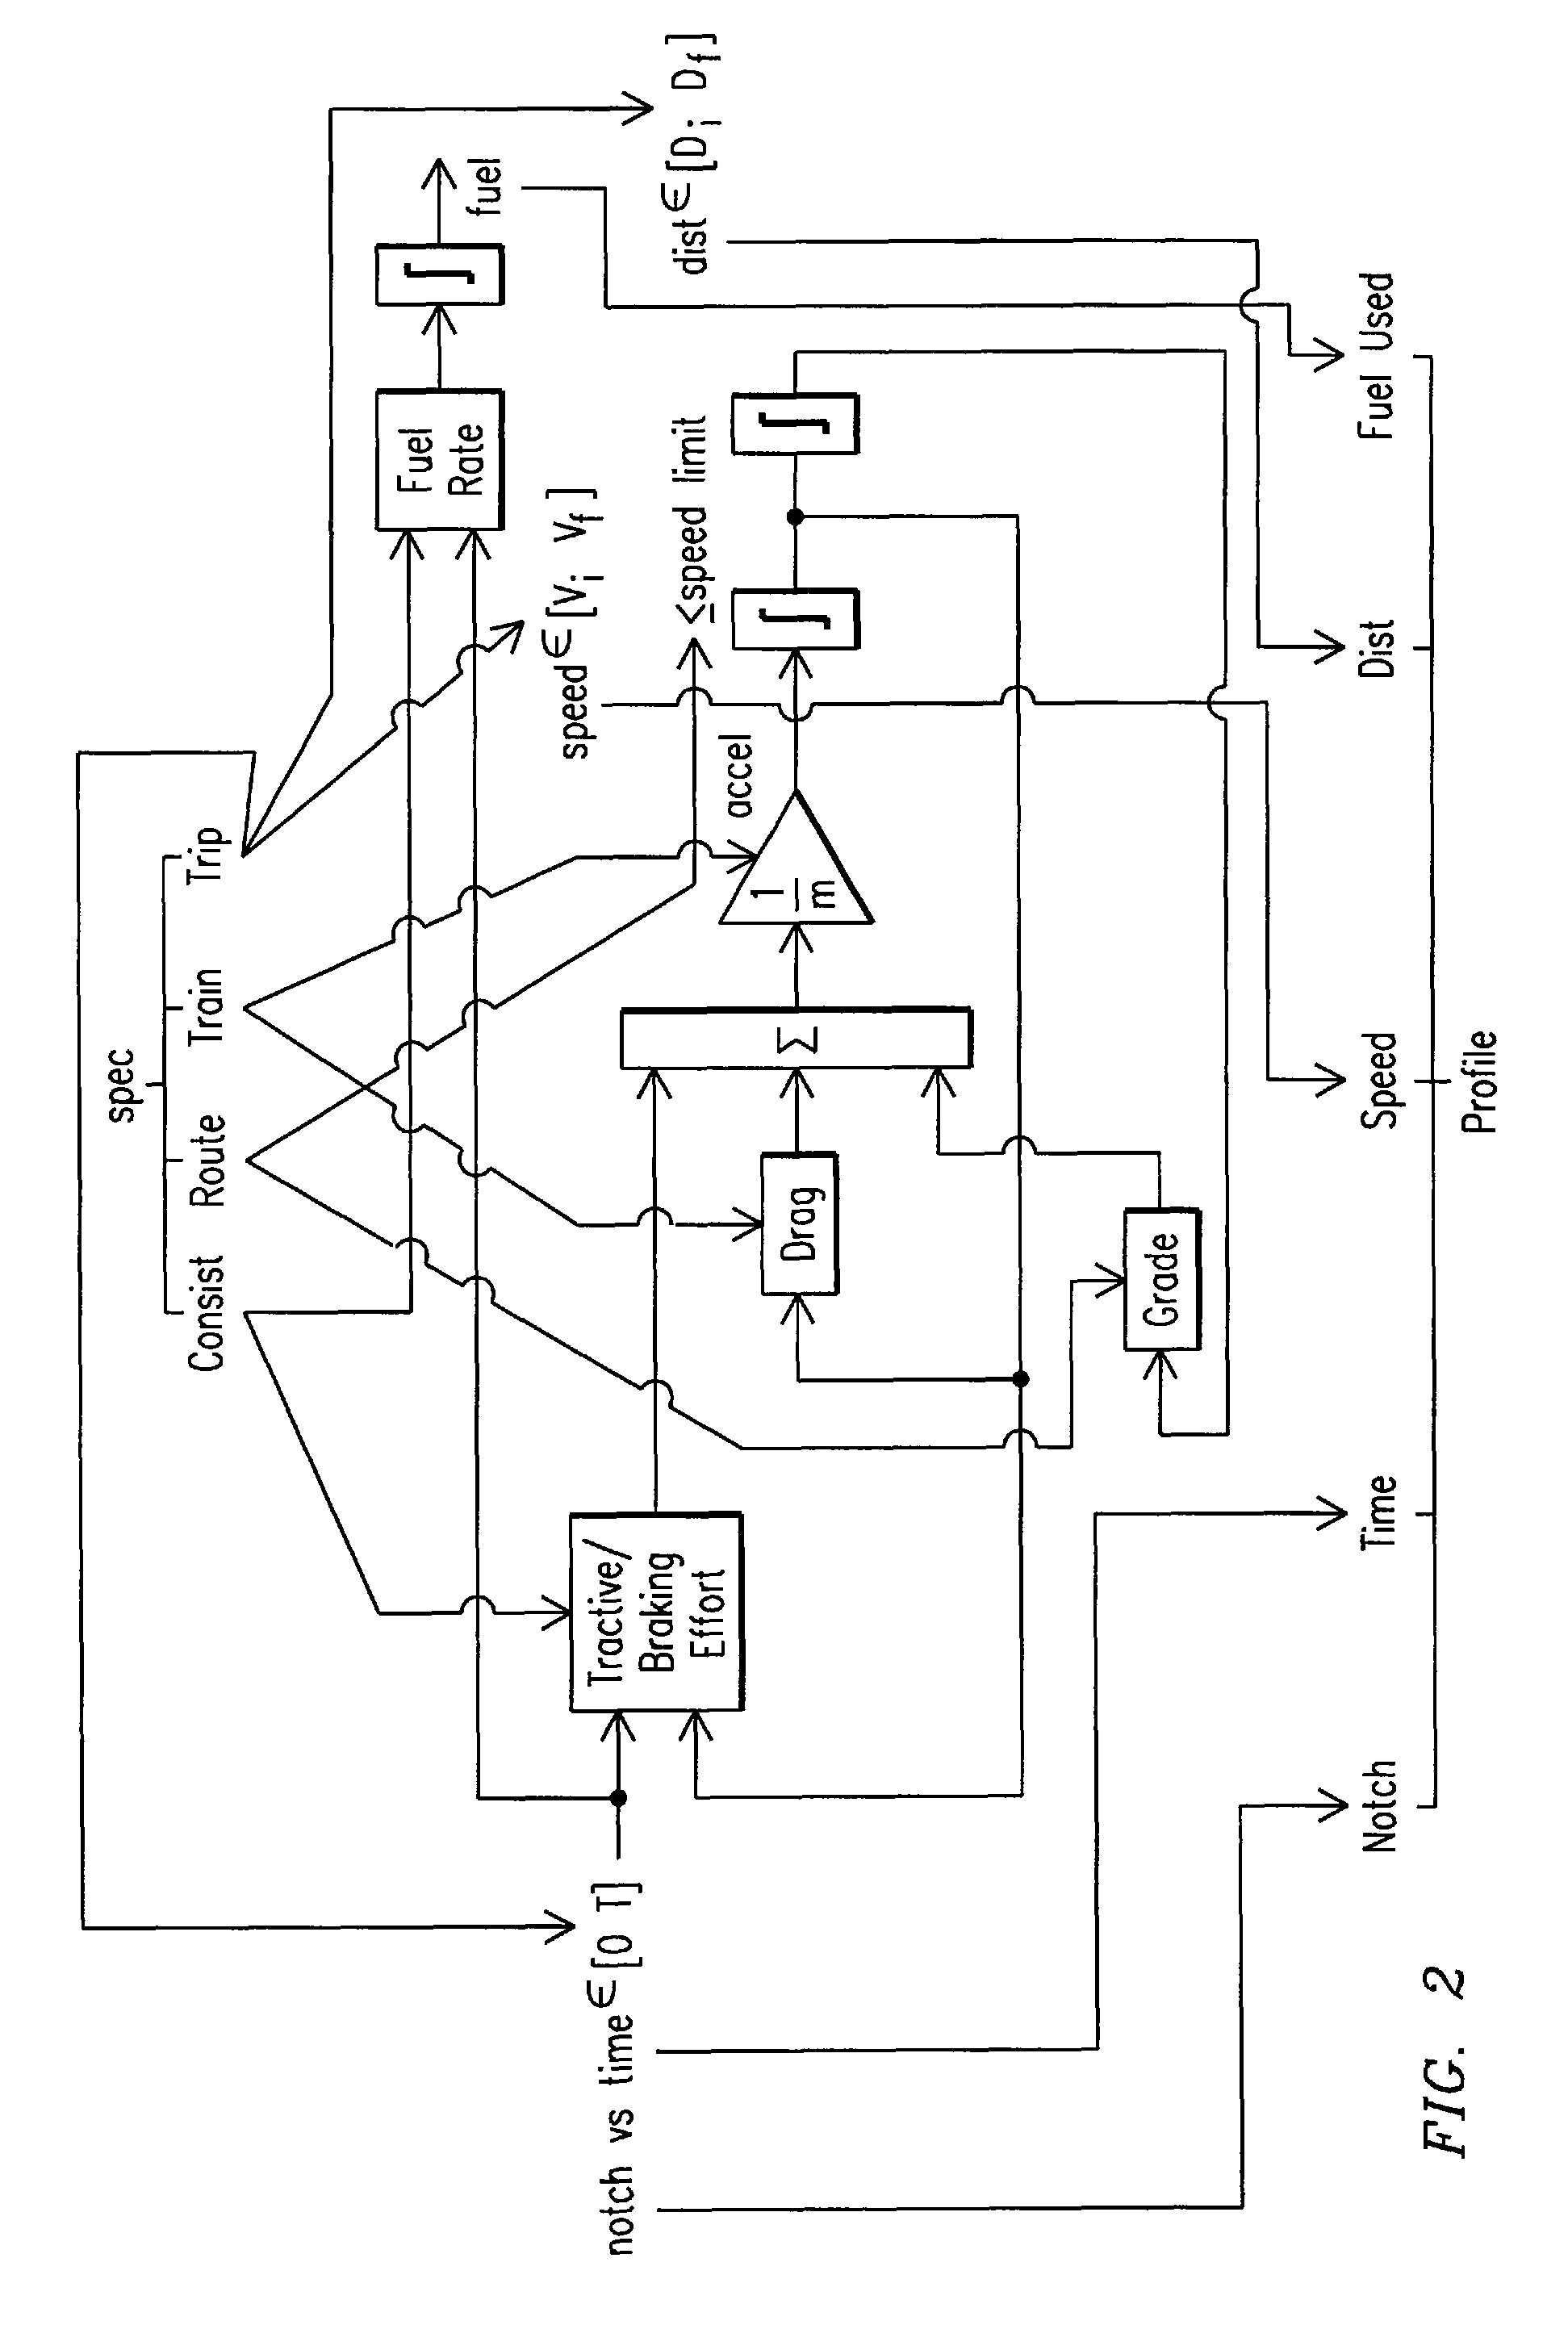 System, method, and computer software code for instructing an operator to control a powered system having an autonomous controller